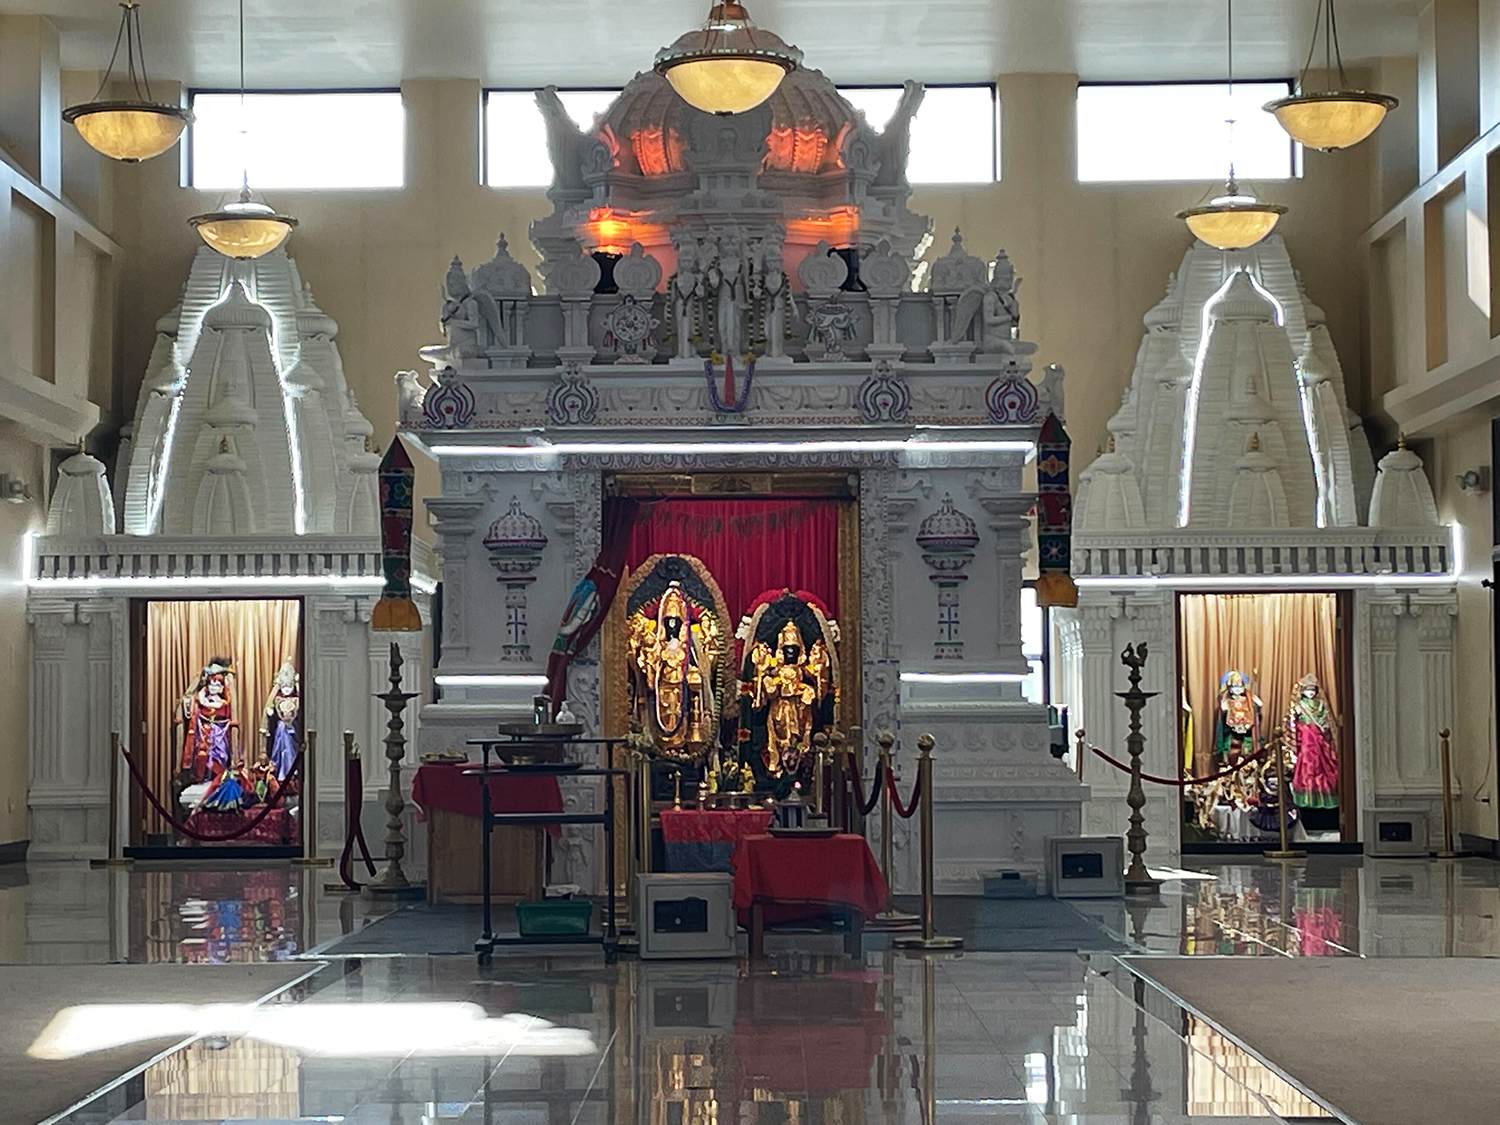 An interior view of the Hindu Temple located in Pewaukee, Wisconsin.  RNS photo by Richa Karmarkar